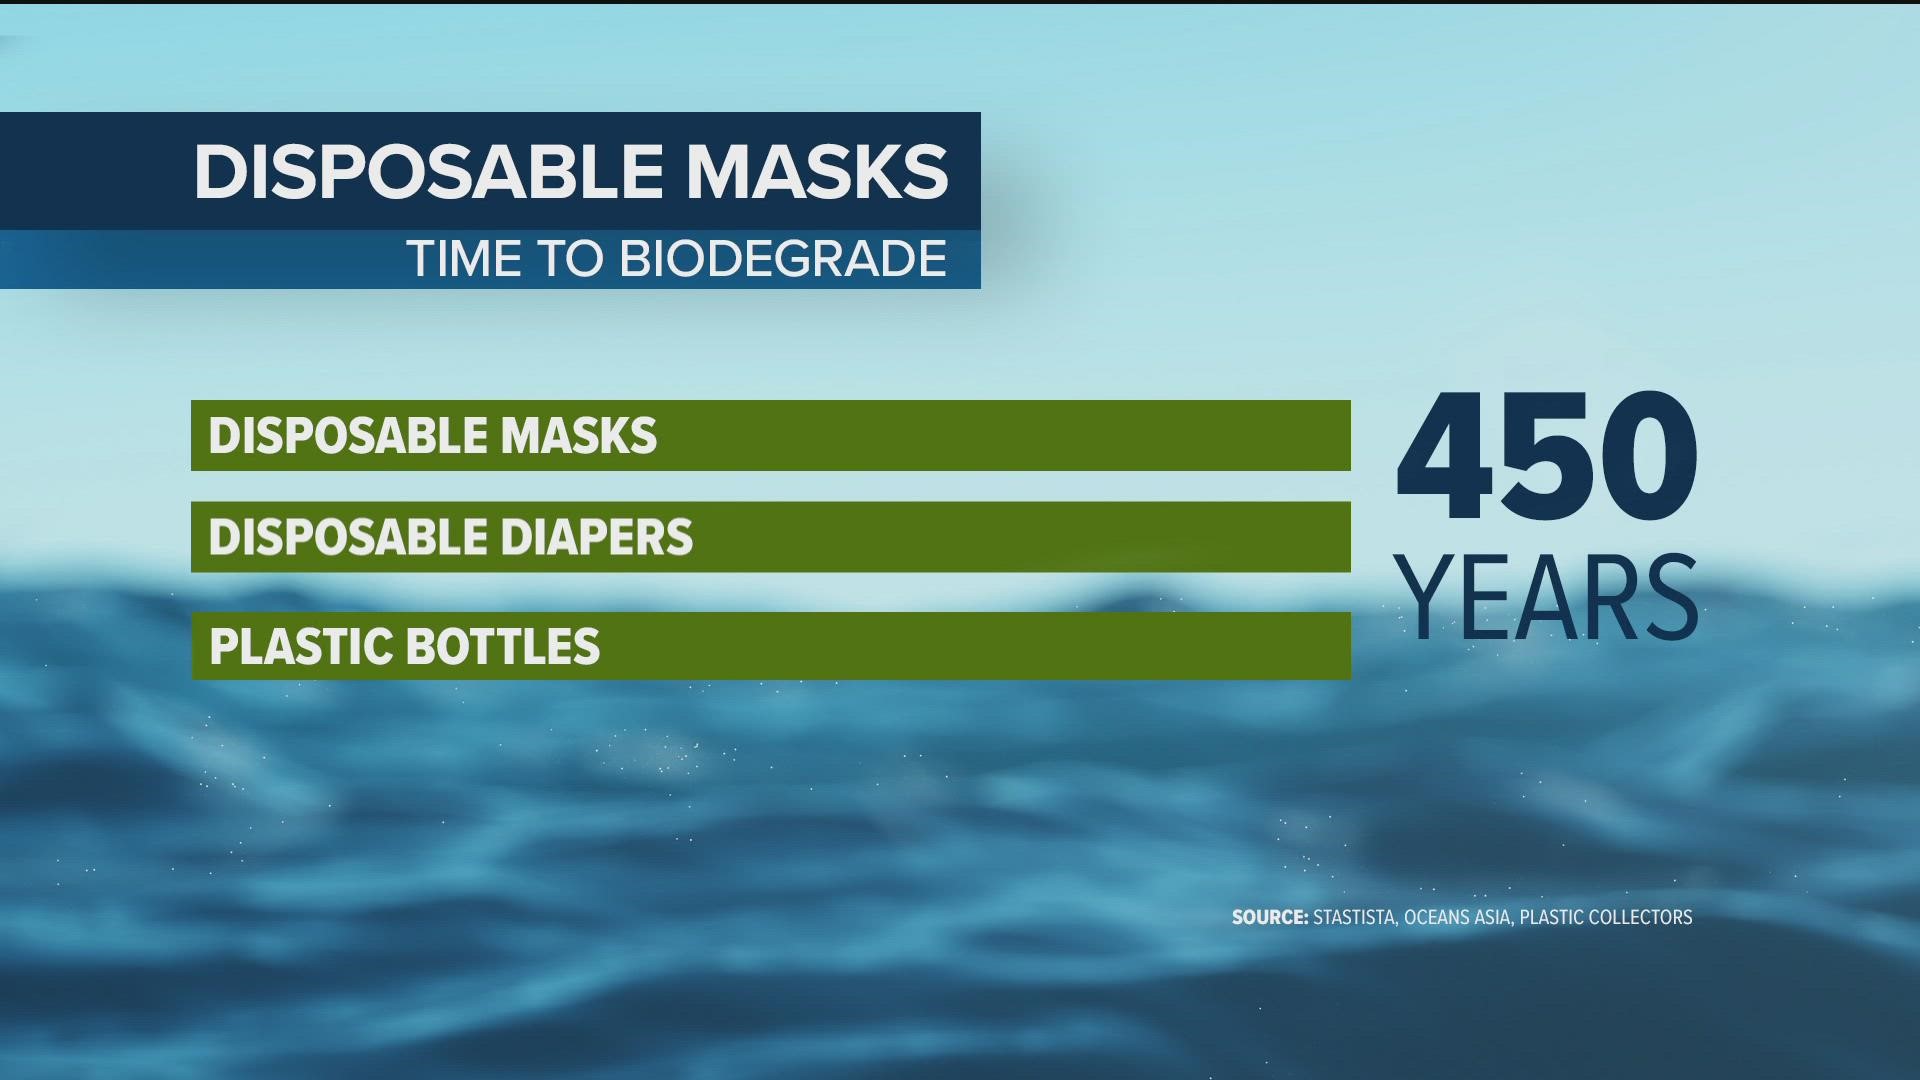 The masks widely used during the COVID pandemic may take centuries to break down in our oceans.